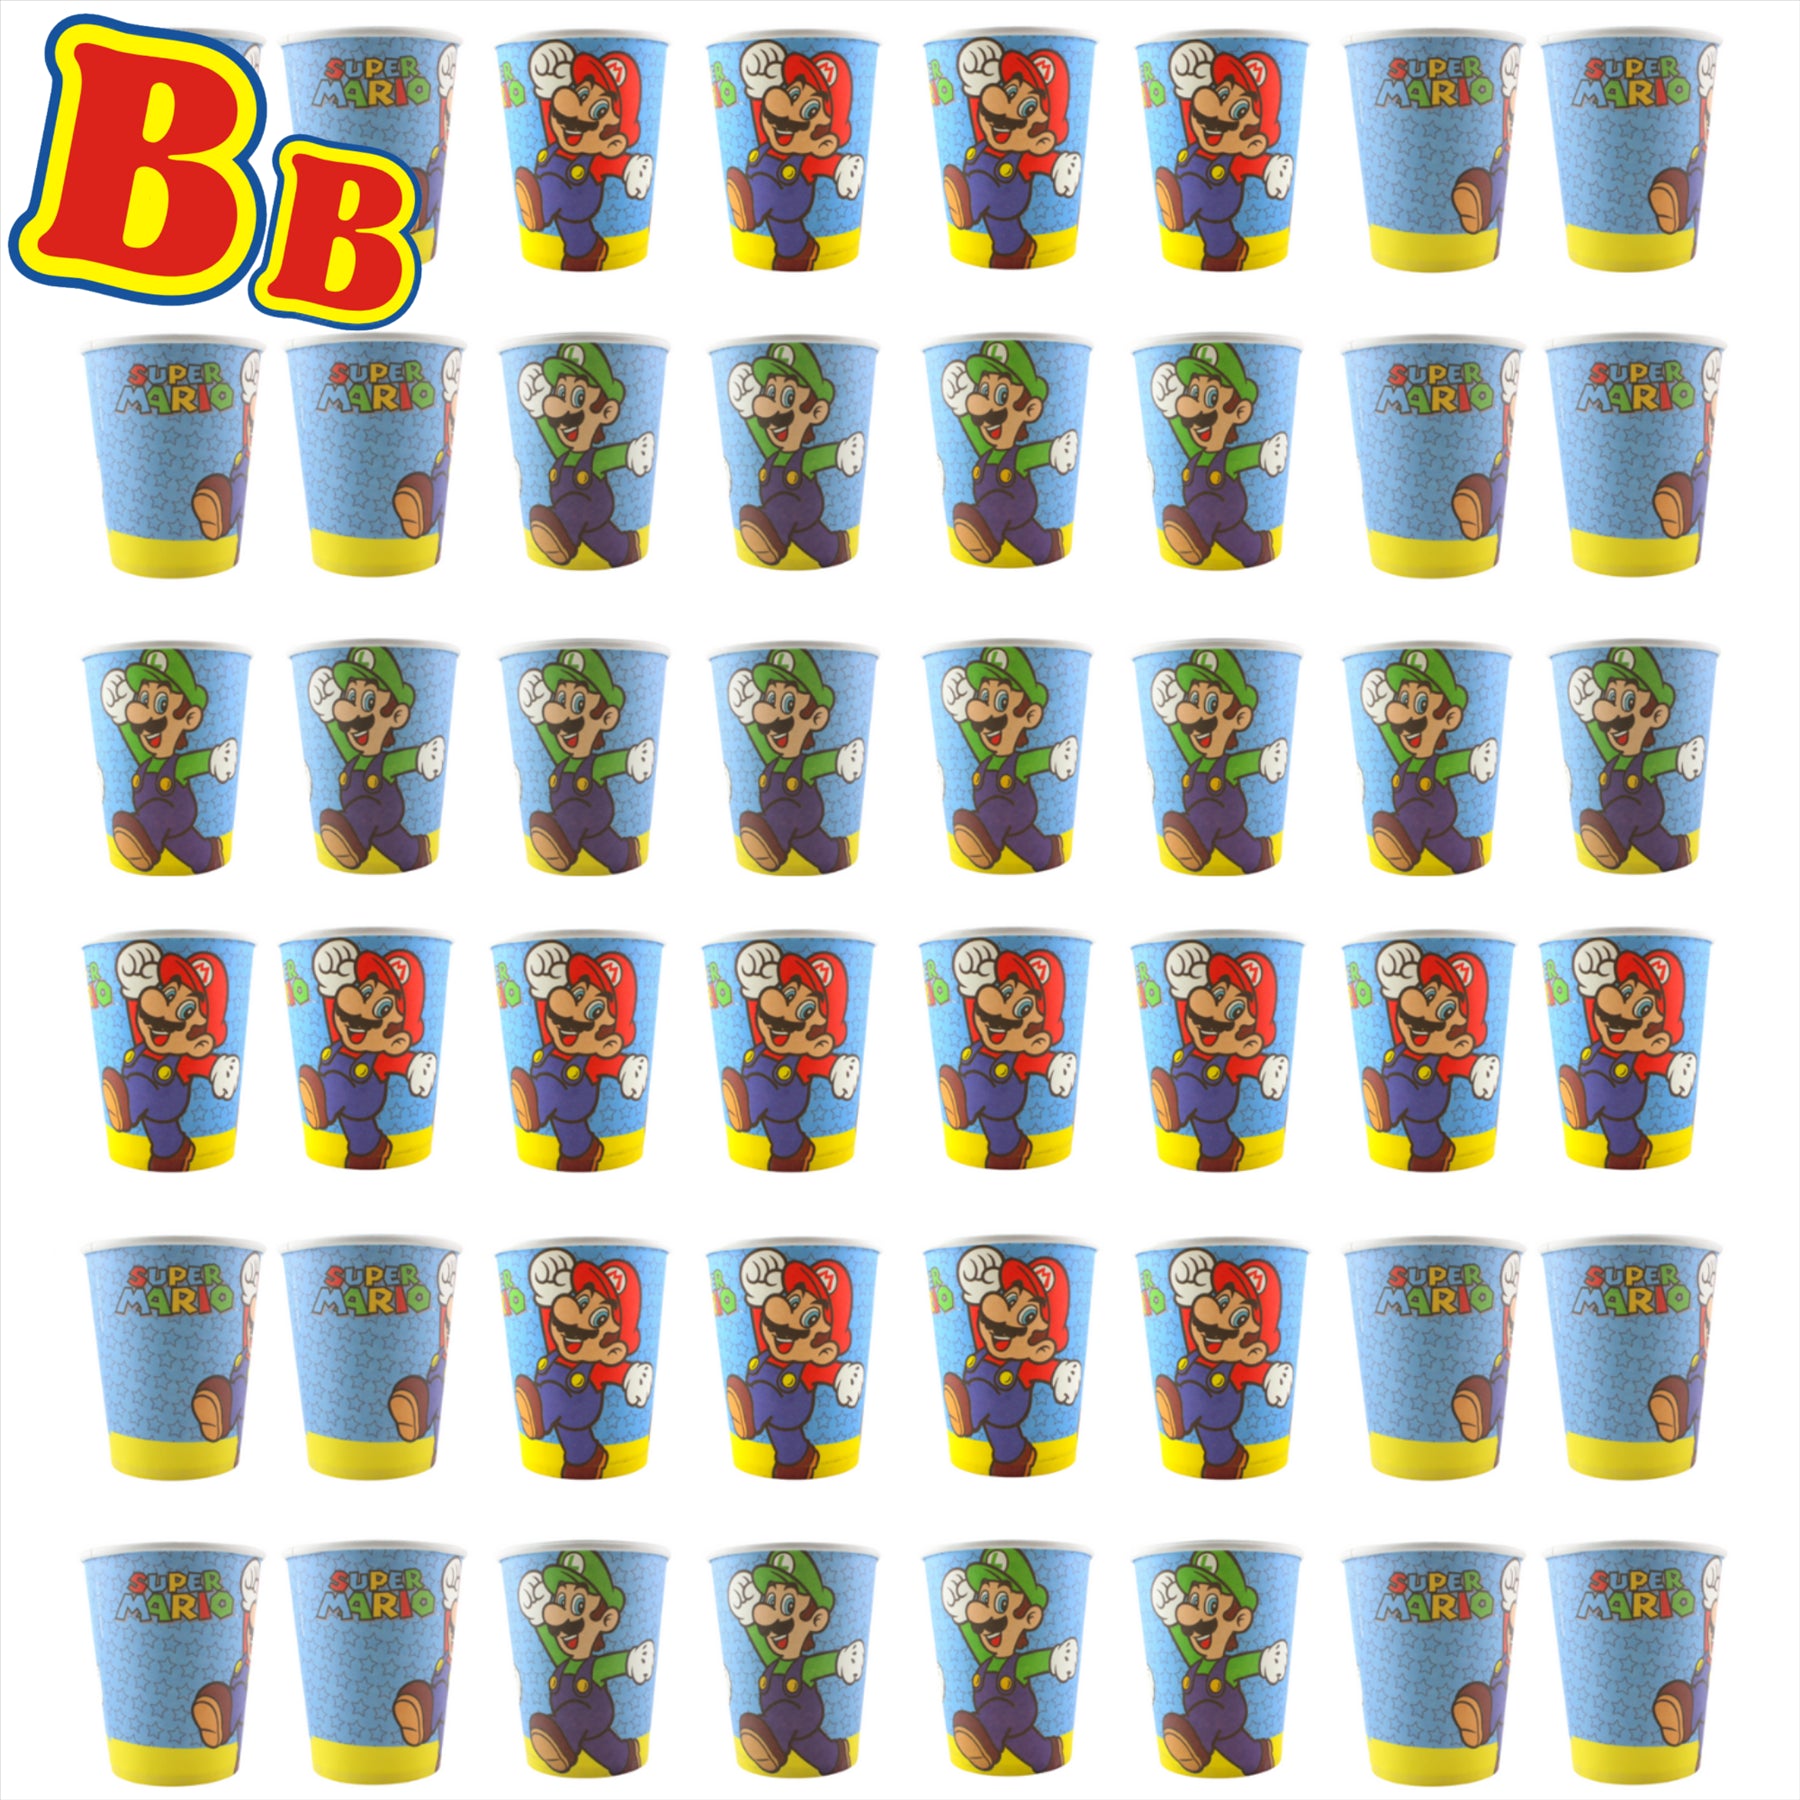 Super Mario Partyware - Paper Cups Pack of 48 - Toptoys2u